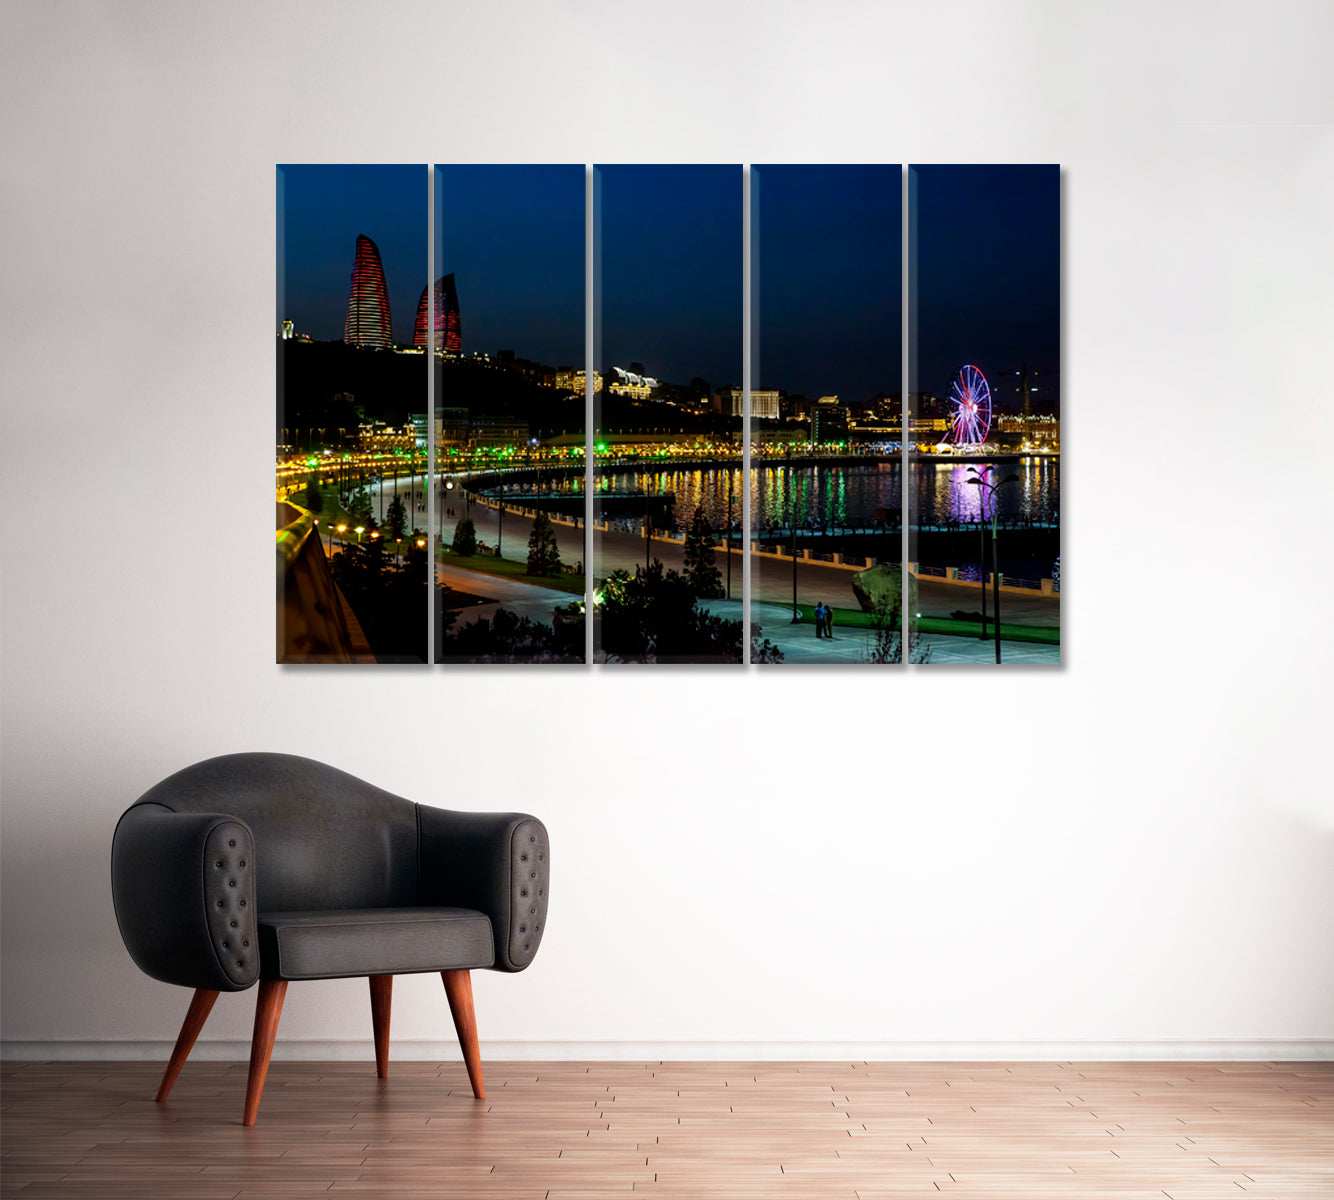 Baku Citiscape at Night Canvas Print ArtLexy 5 Panels 36"x24" inches 